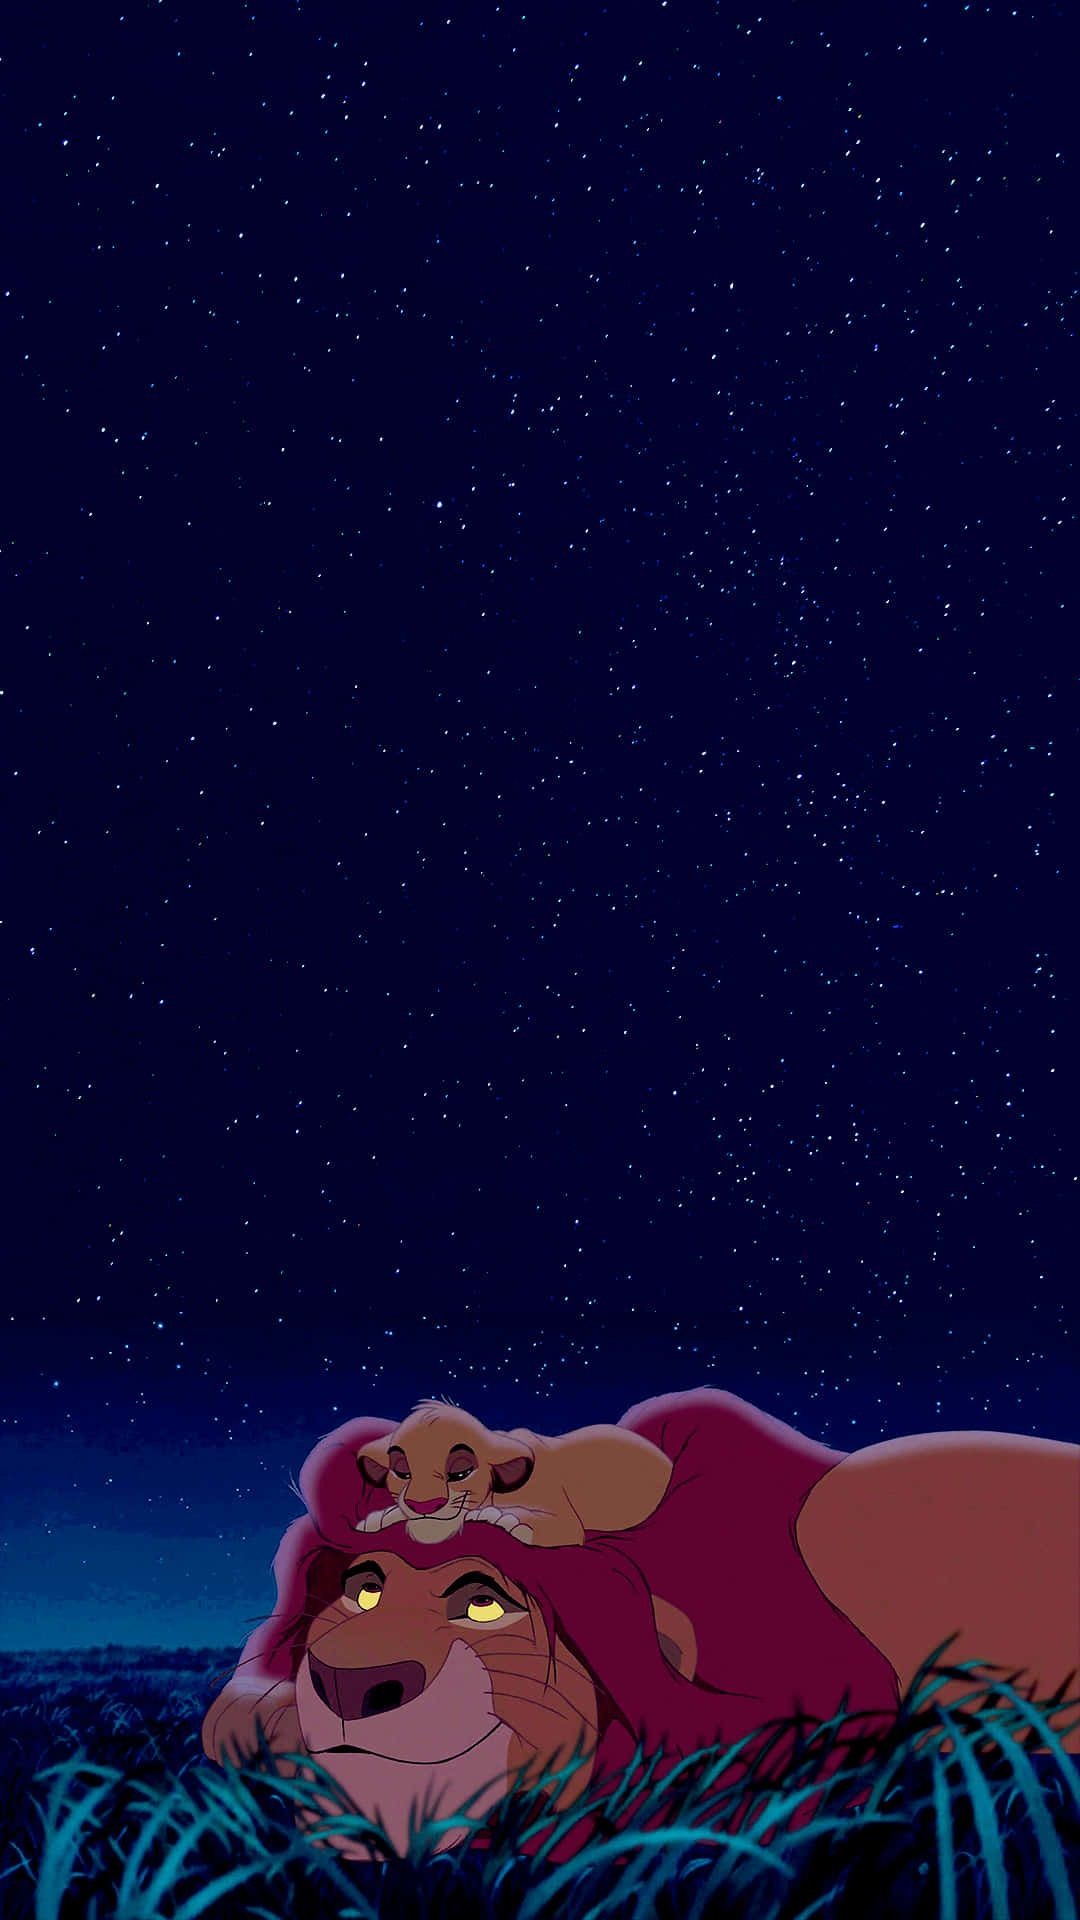 The lion king wallpaper for iPhone and Android phone - The Lion King